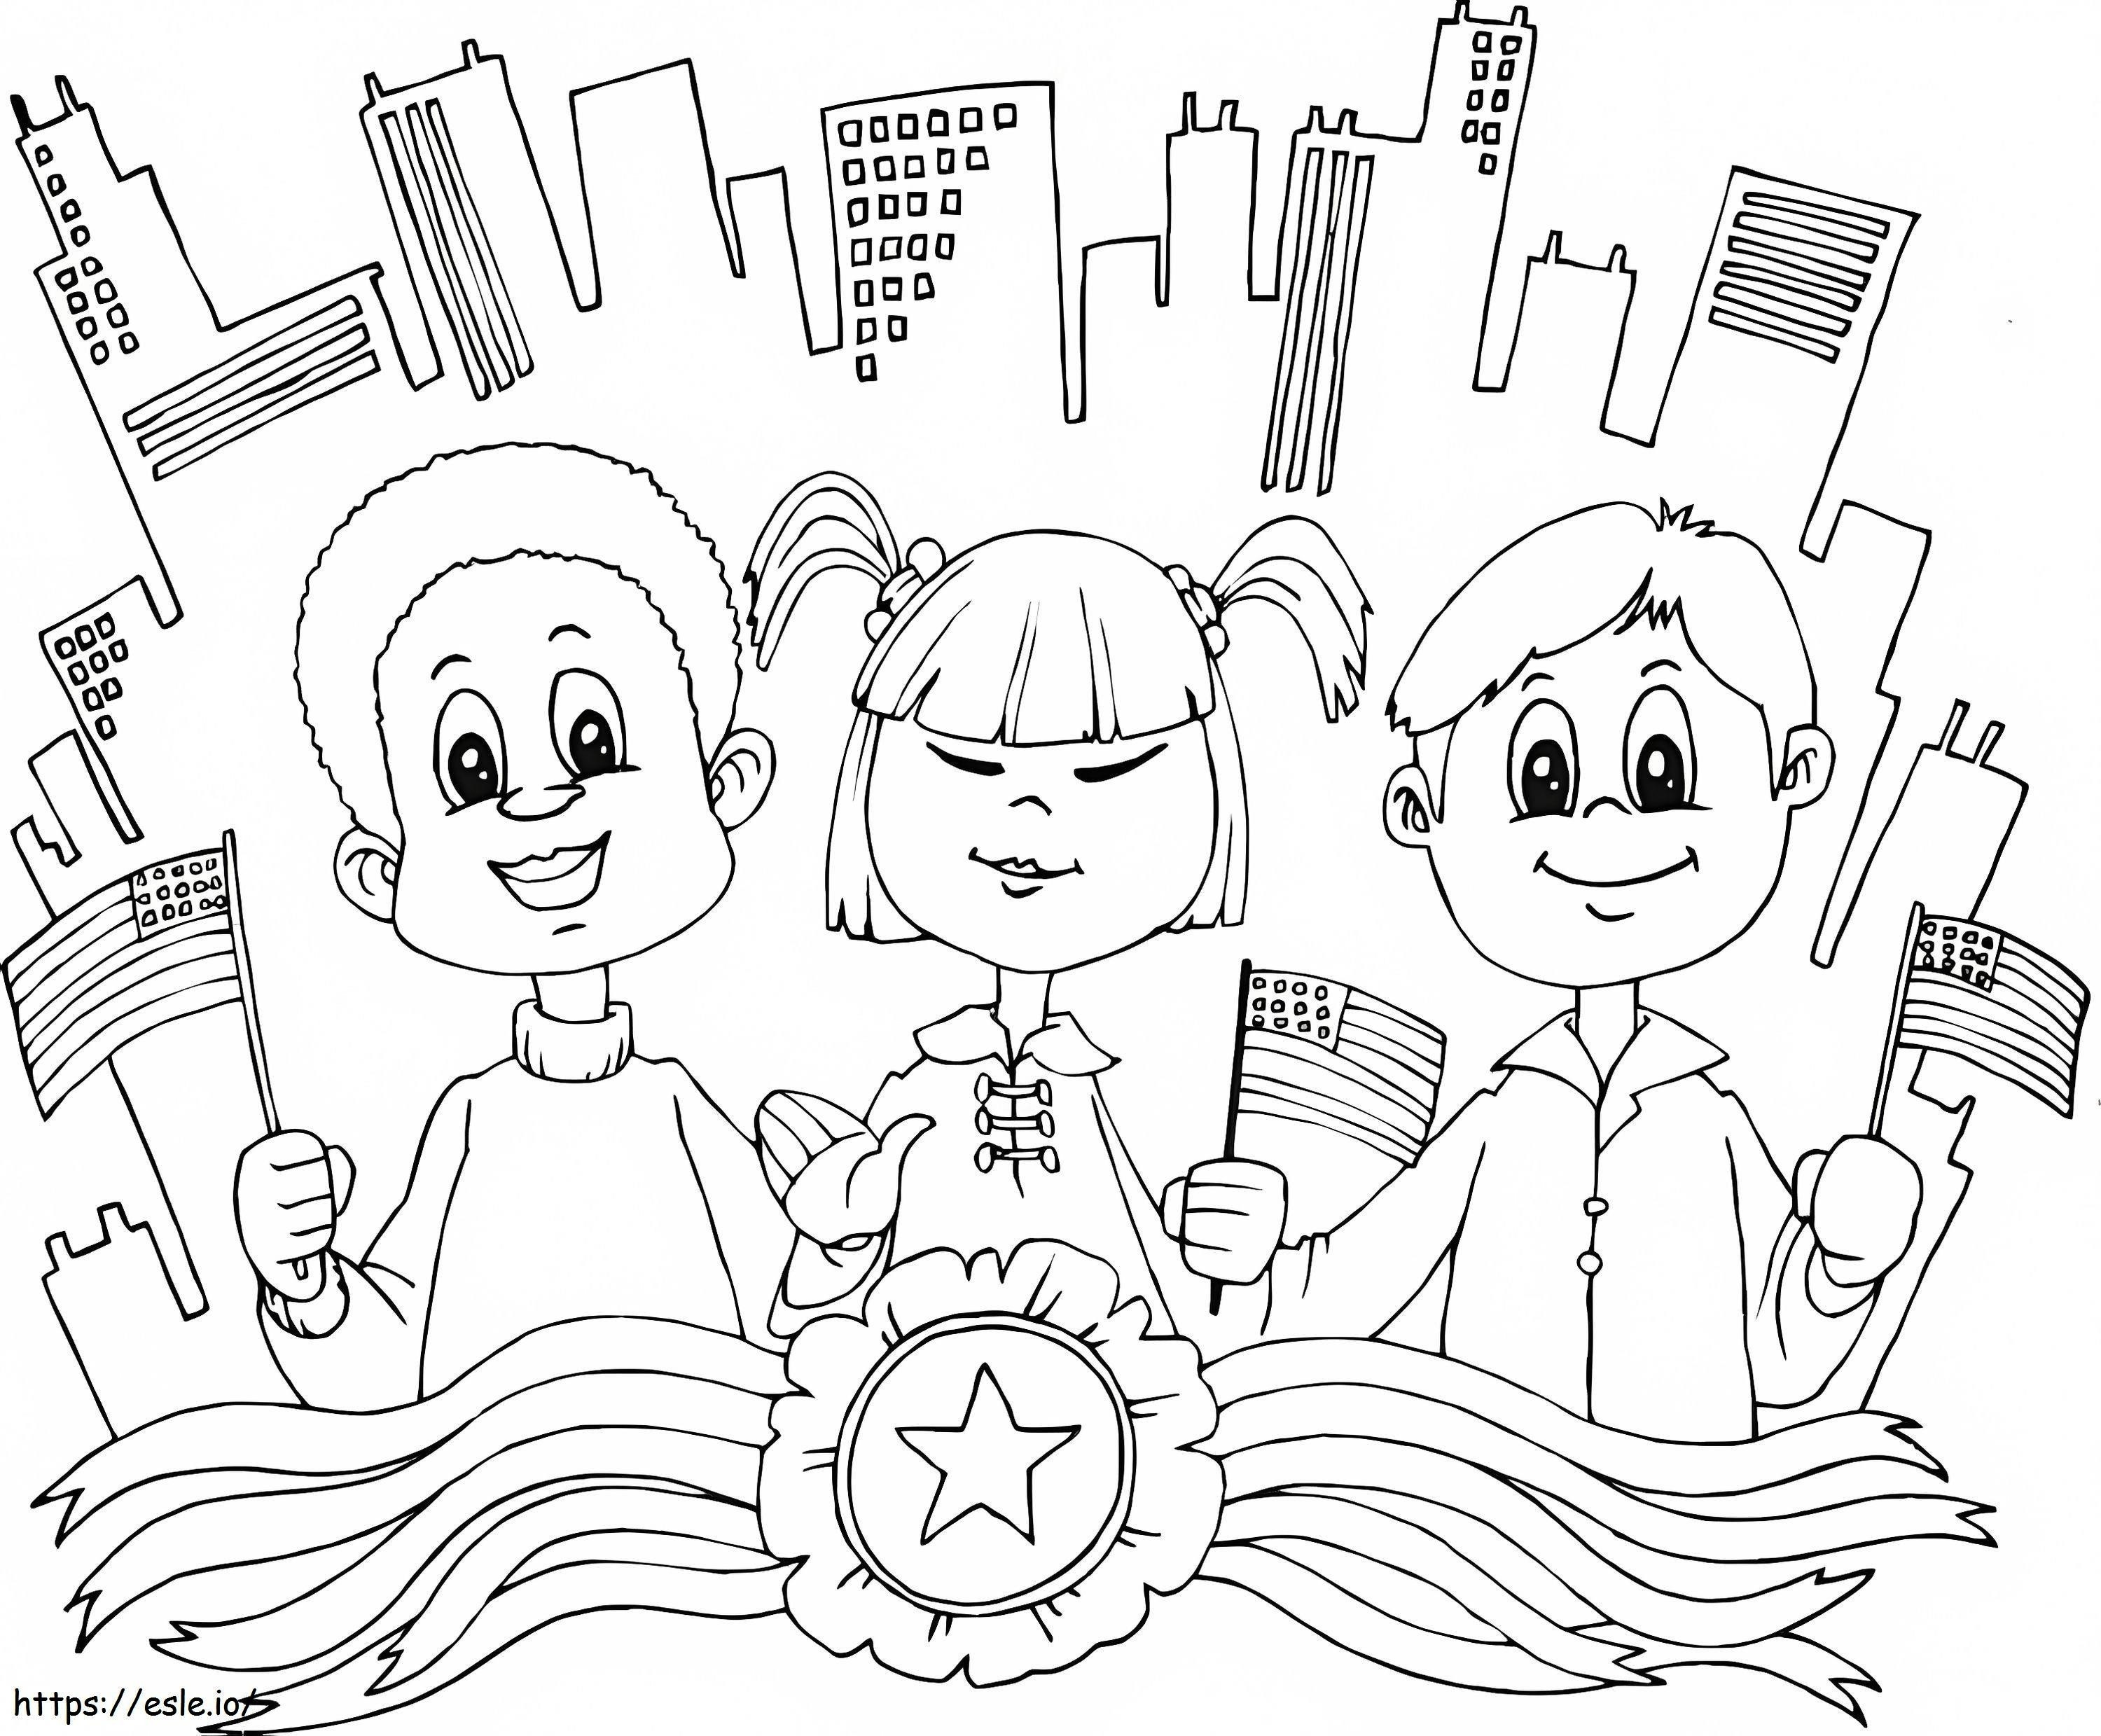 Printable Diversity coloring page